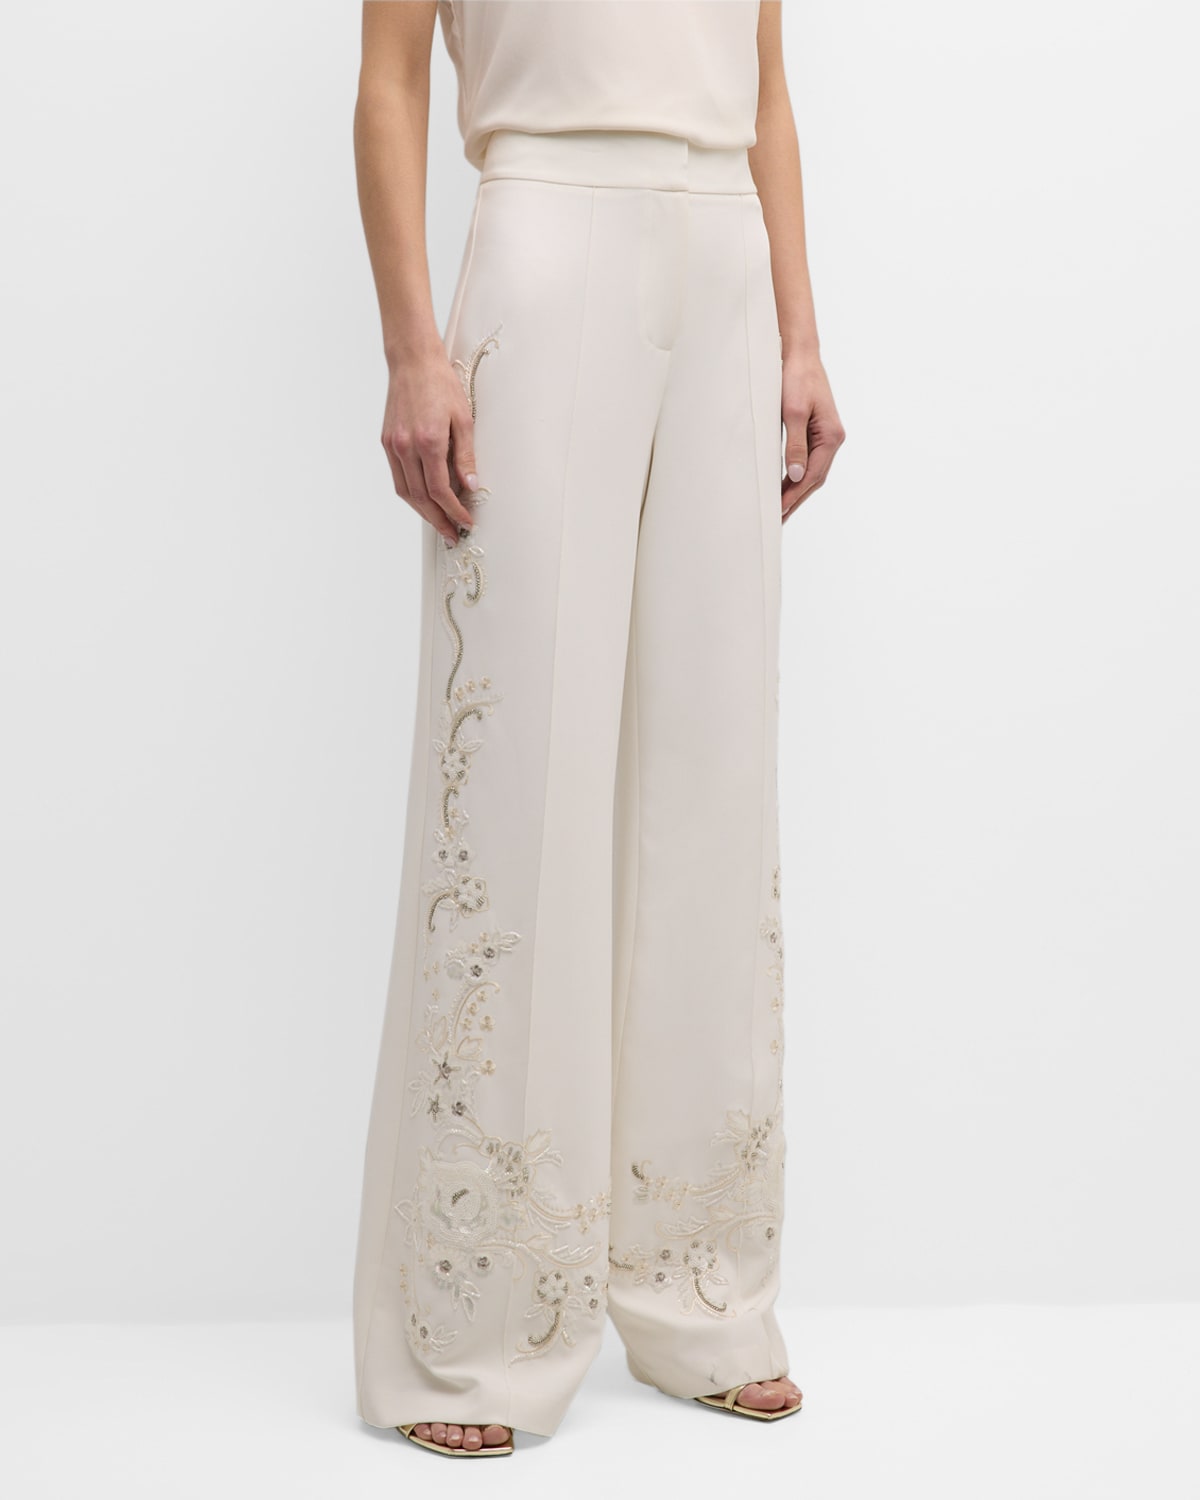 Samantha Beaded Floral-Embroidered Pants